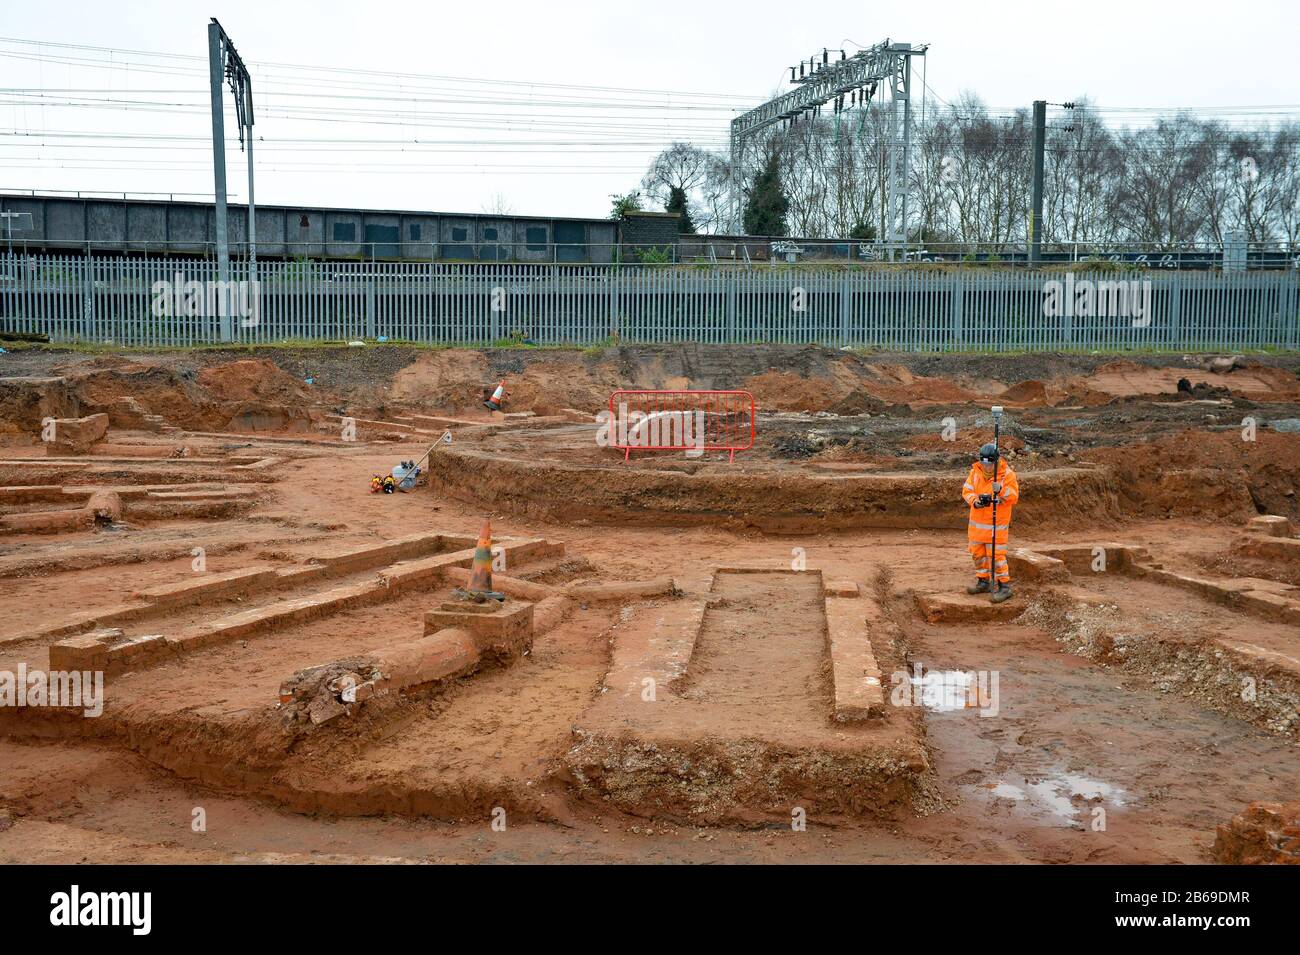 Archaeologists work at the site of a 19th century roundhouse which has been unearthed during the excavation work for HS2 on the site of the former Birmingham Curzon Street railway station, which opened in 1838. Trial trenching on the construction site has revealed the remains of the station's roundhouse including evidence of the central turntable, the exterior wall and the radial inspection pits. Stock Photo